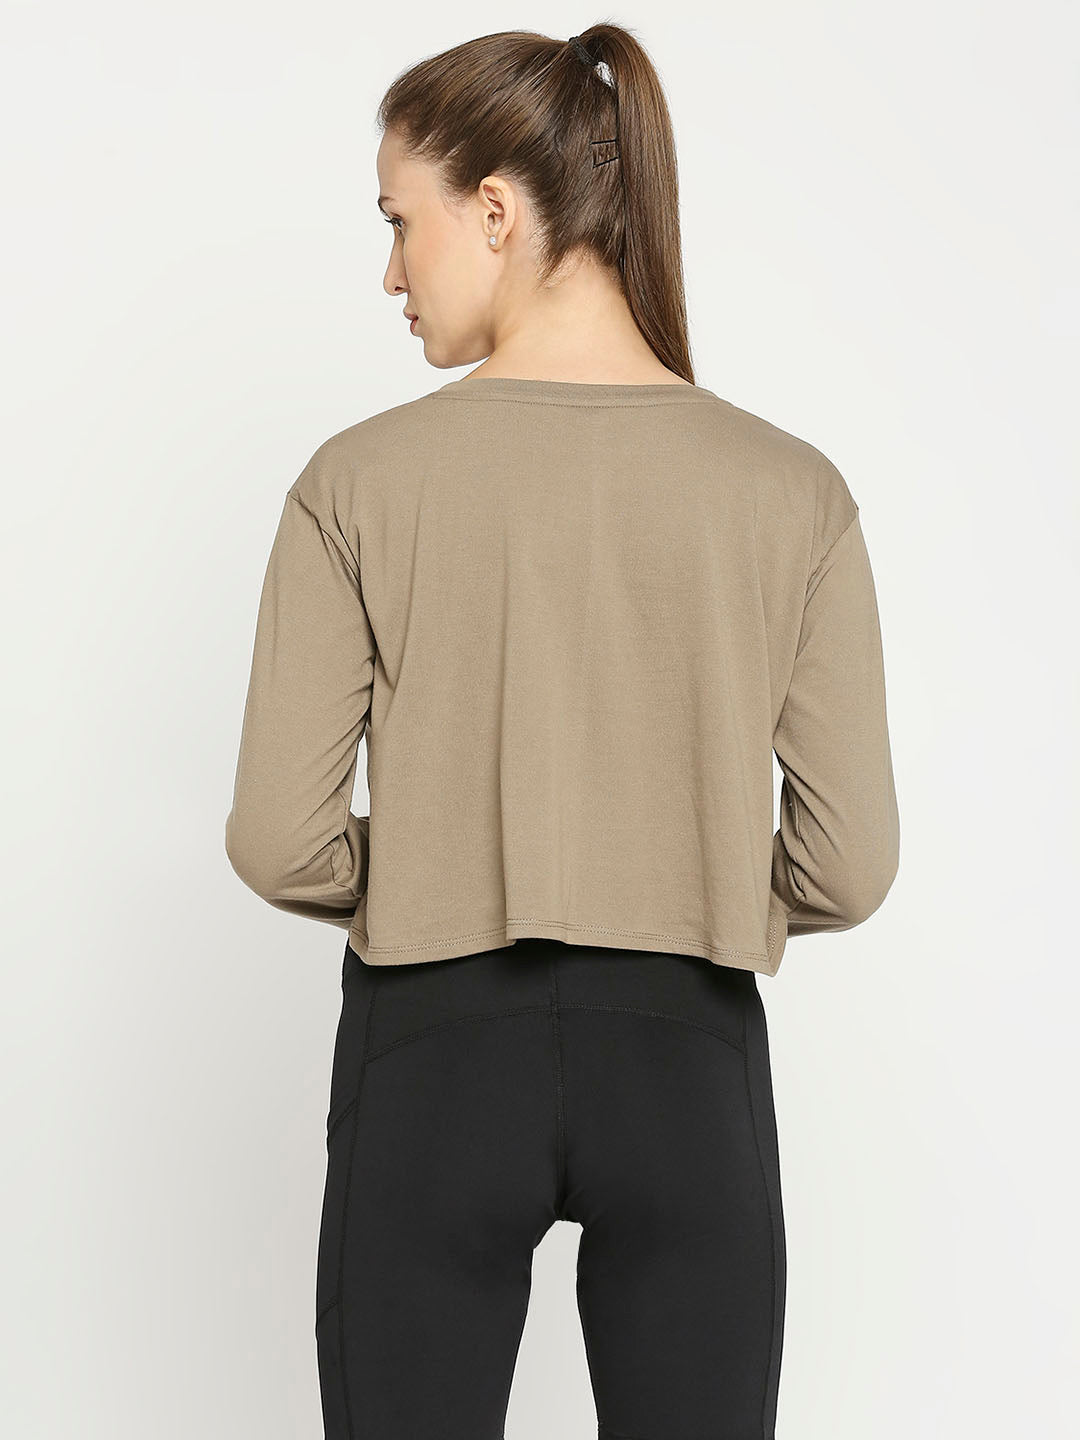 Women's Long Sleeves Sports Cropped T-Shirt - Mud Brown